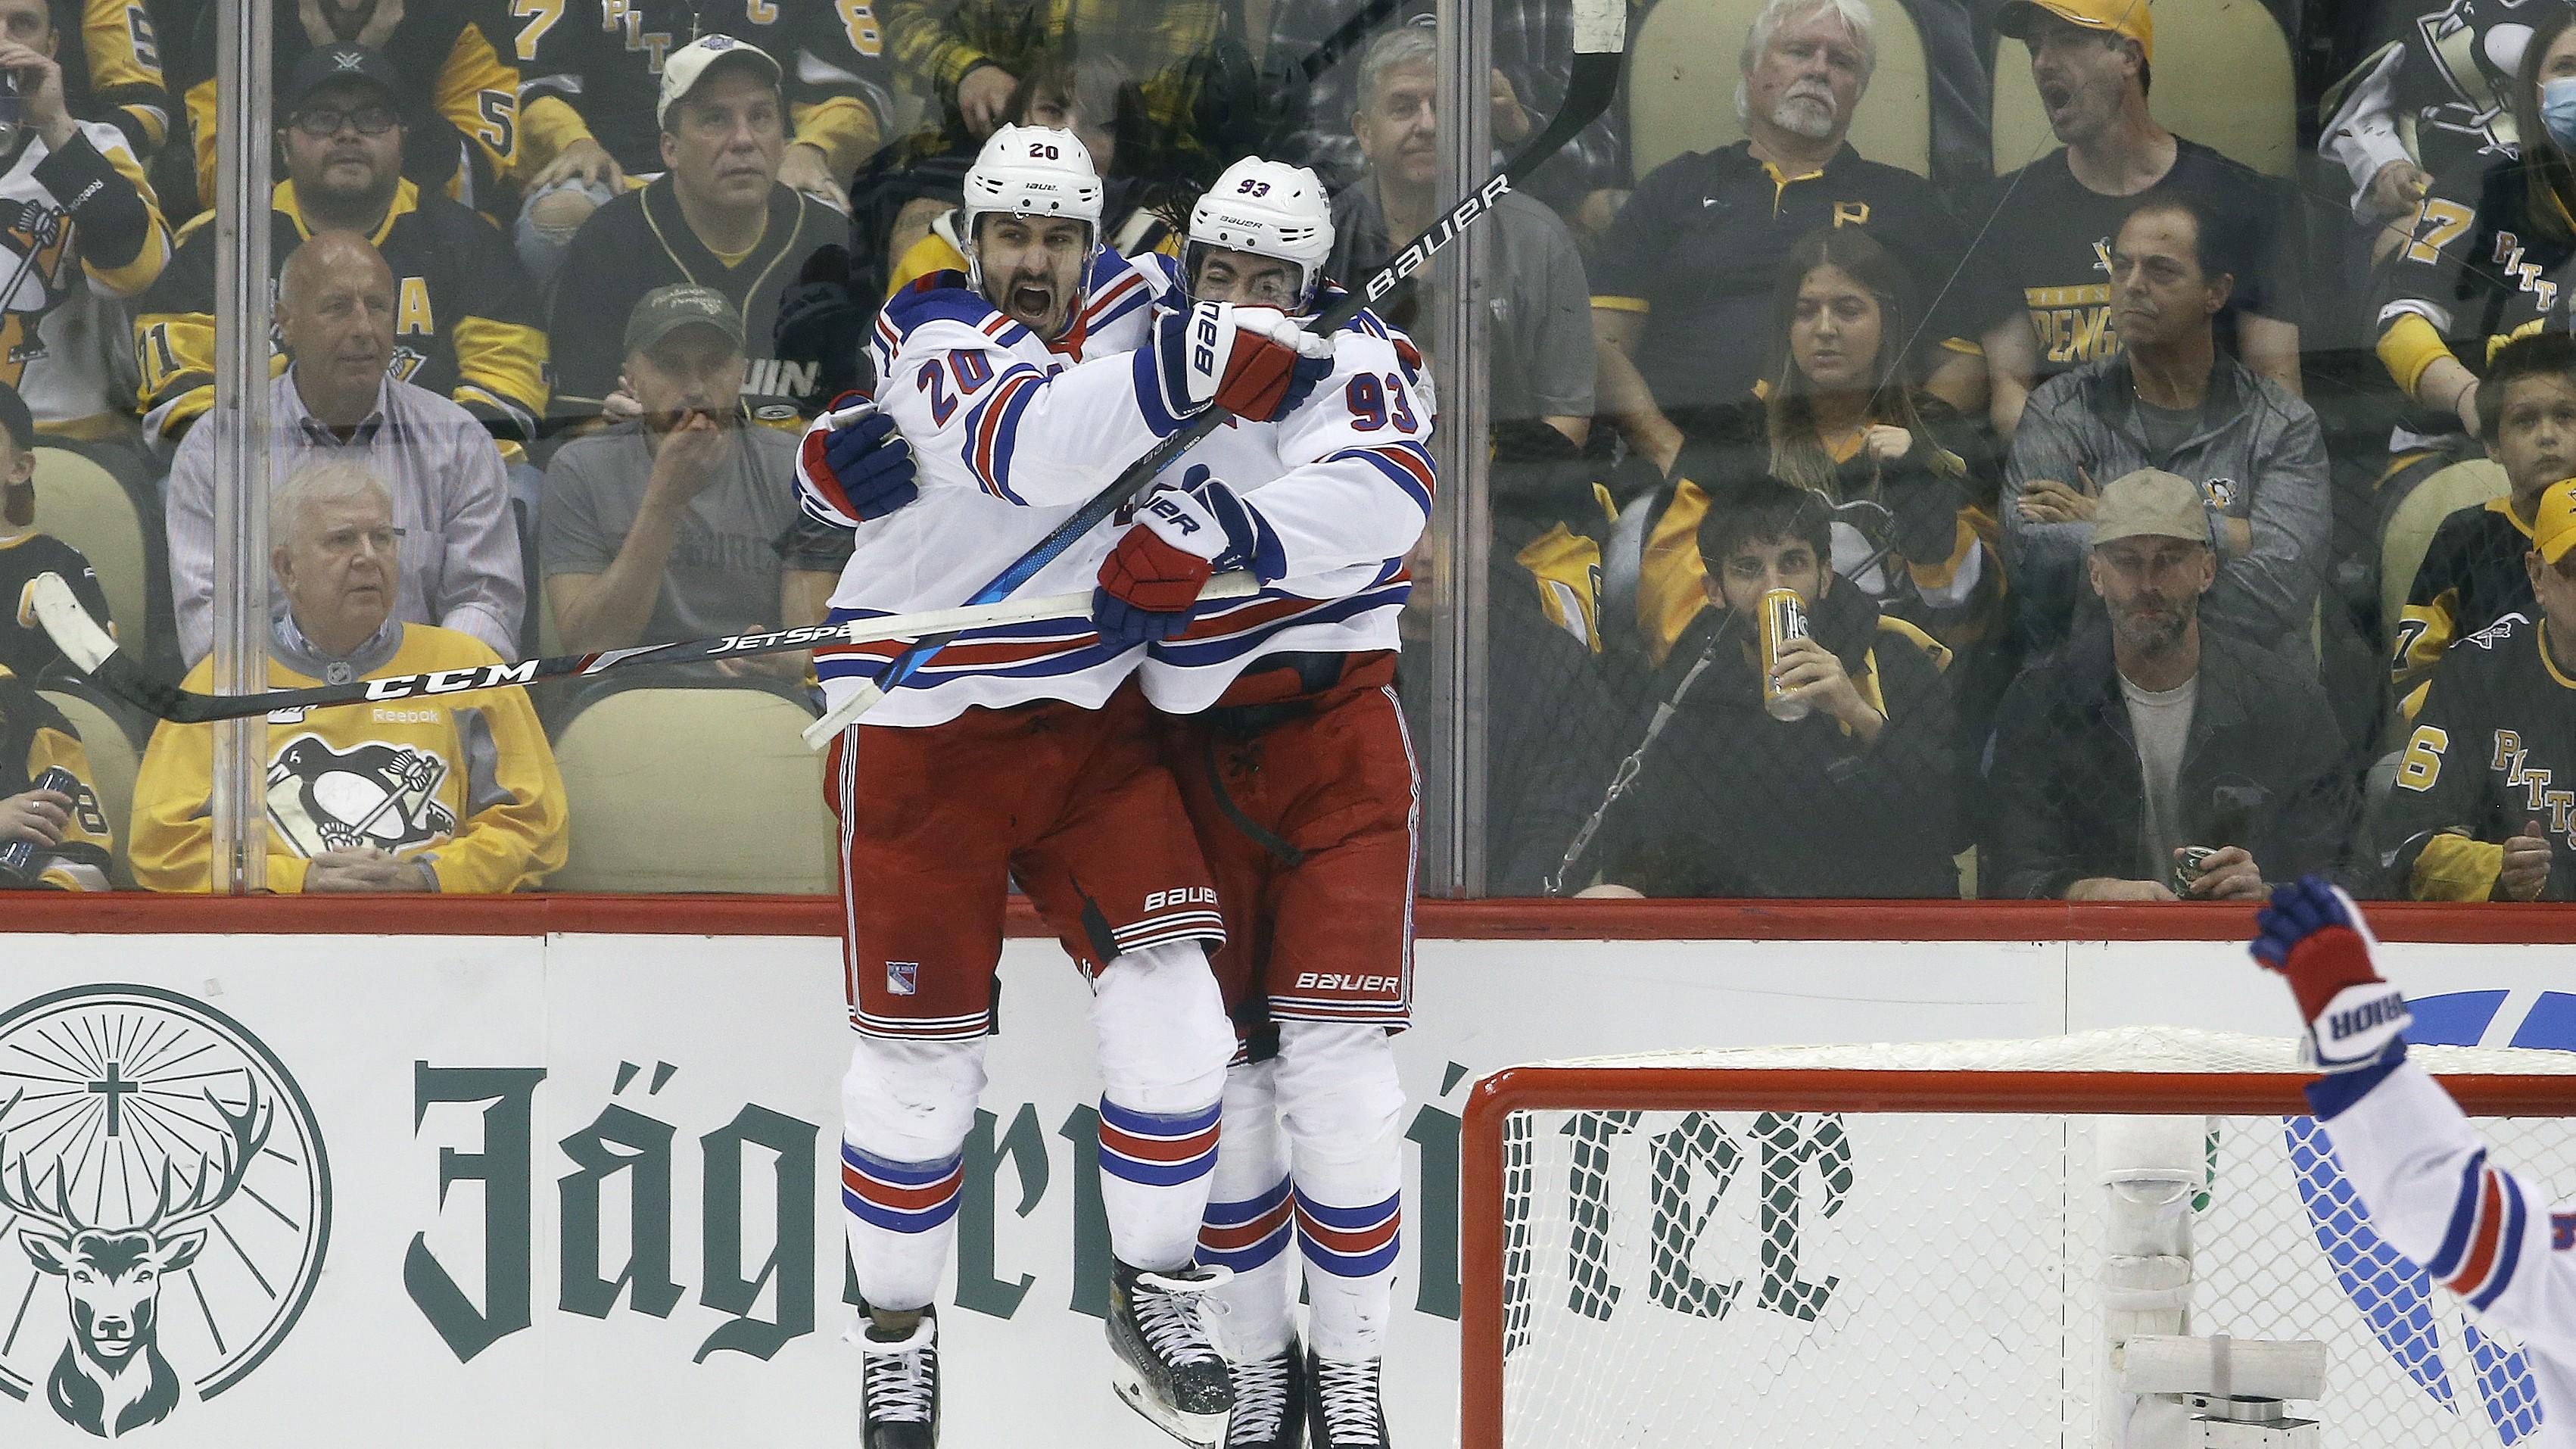 May 13, 2022; Pittsburgh, Pennsylvania, USA; New York Rangers left wing Chris Kreider (20) and center Mika Zibanejad (93) celebrate a goal by Kreider against Pittsburgh Penguins goaltender Louis Domingue (70) during the second period in game six of the first round of the 2022 Stanley Cup Playoffs at PPG Paints Arena. Mandatory Credit: Charles LeClaire-USA TODAY Sports / Charles LeClaire-USA TODAY Sports